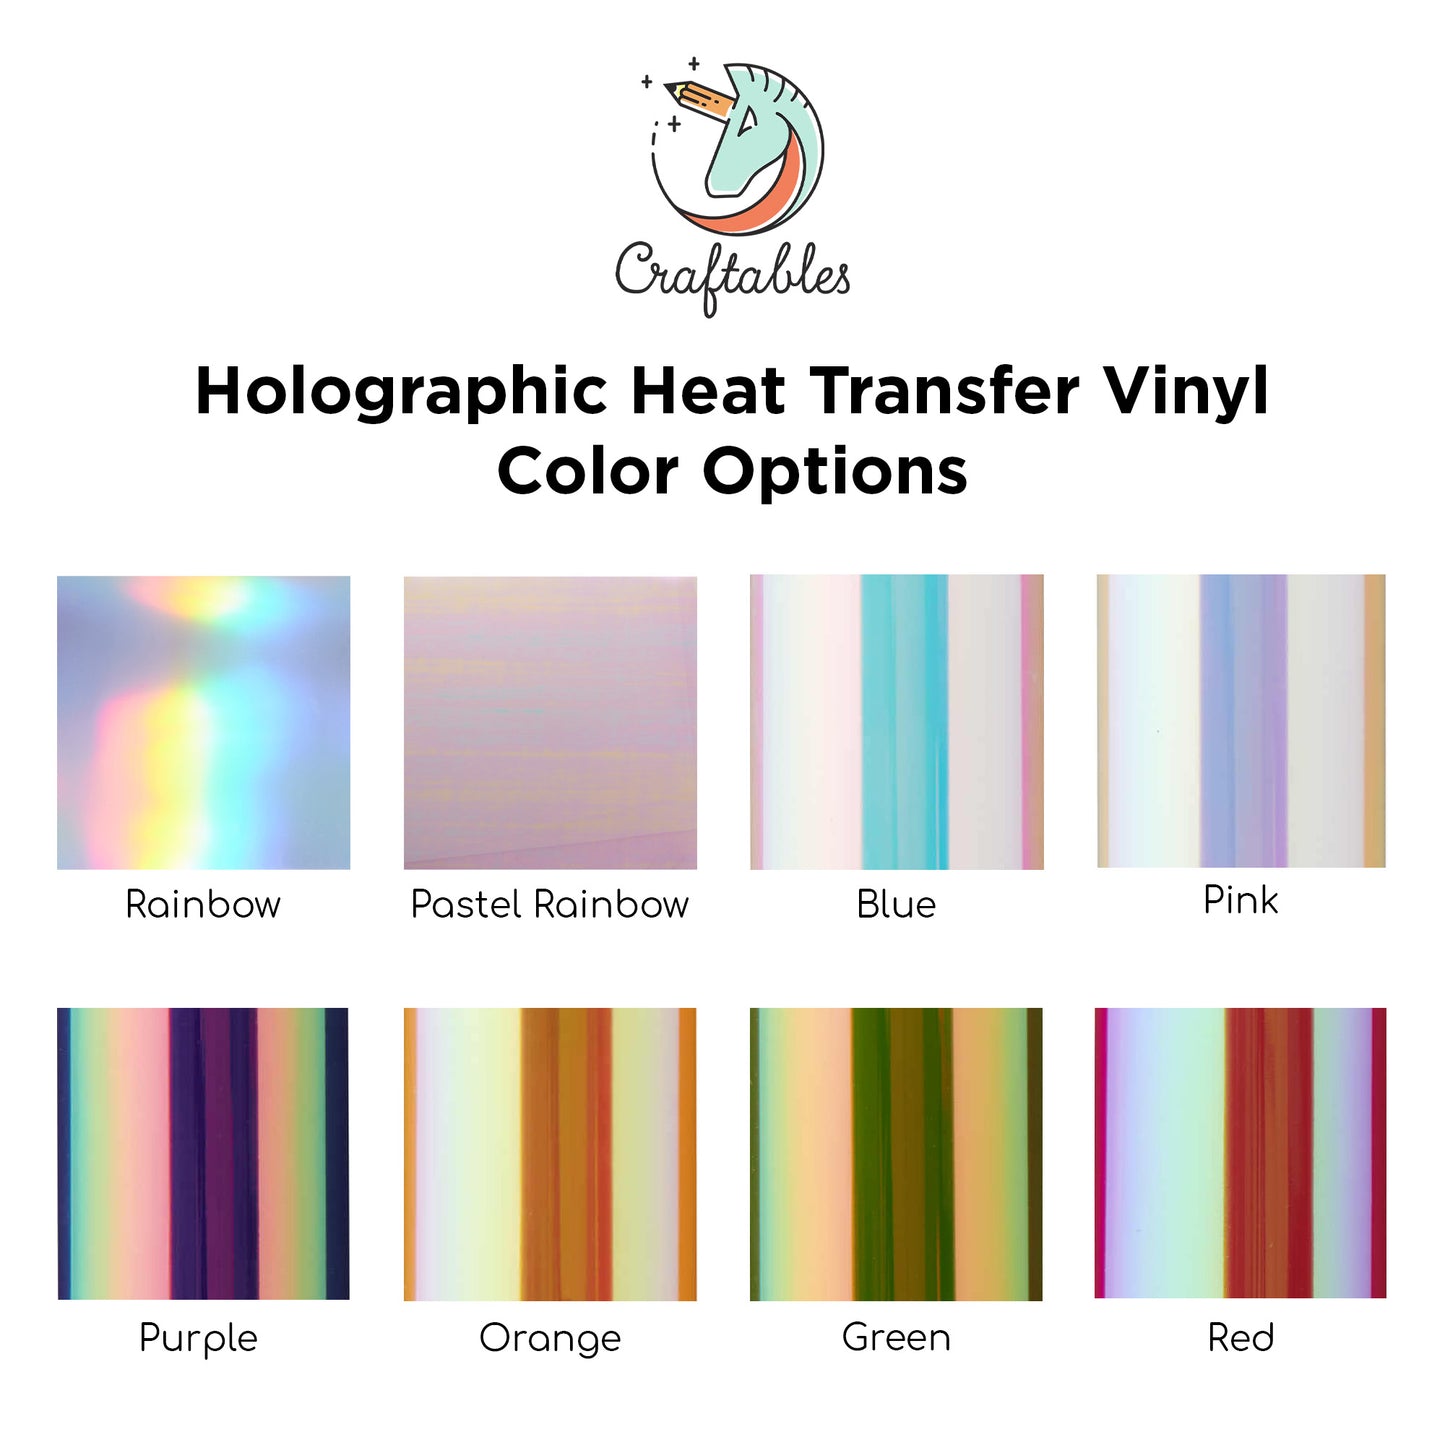 Red Holographic Heat Transfer Vinyl Rolls By Craftables